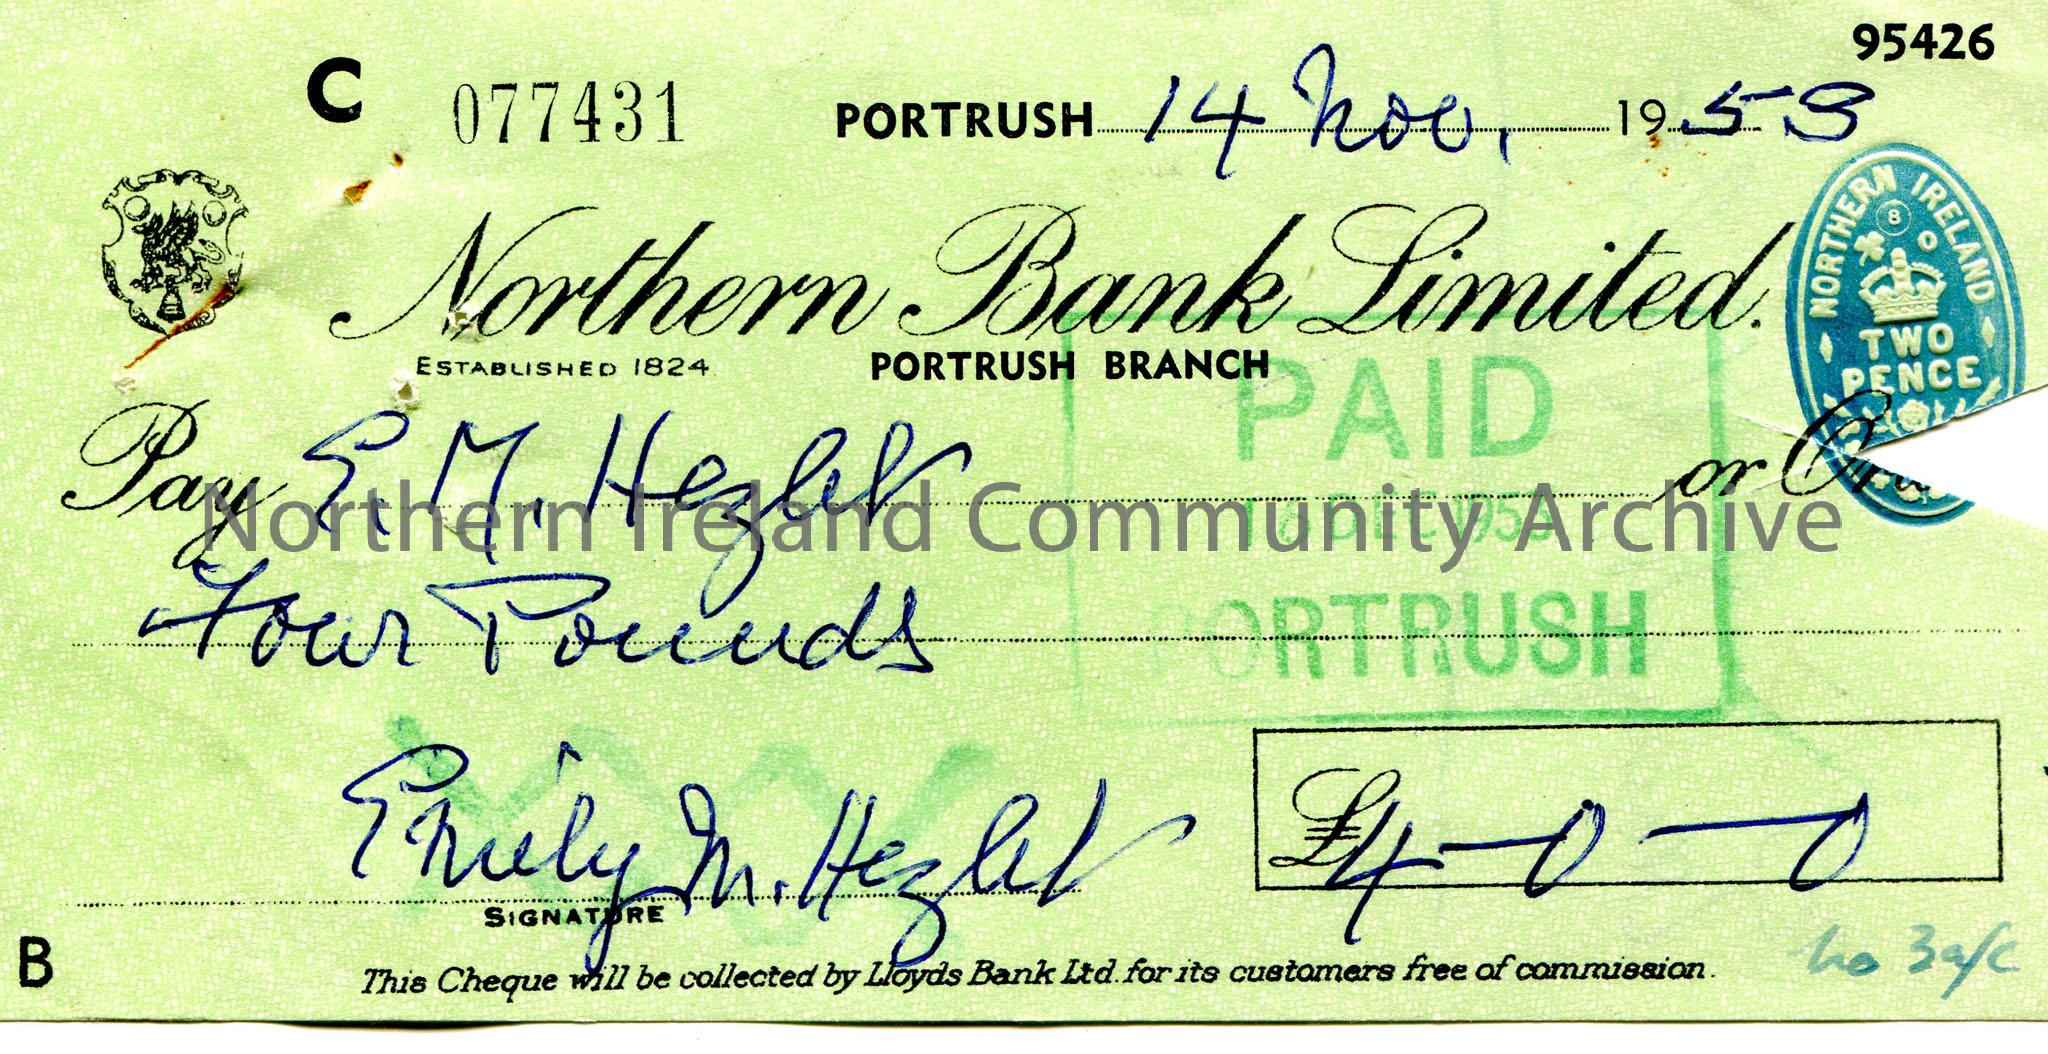 Northern Bank Limited, Portrush branch, cheque. Dated 14th November, 1953. Payable to E. M. Hezlet from Emily M. Hezlet for £4.0.0. Paid stamp on…